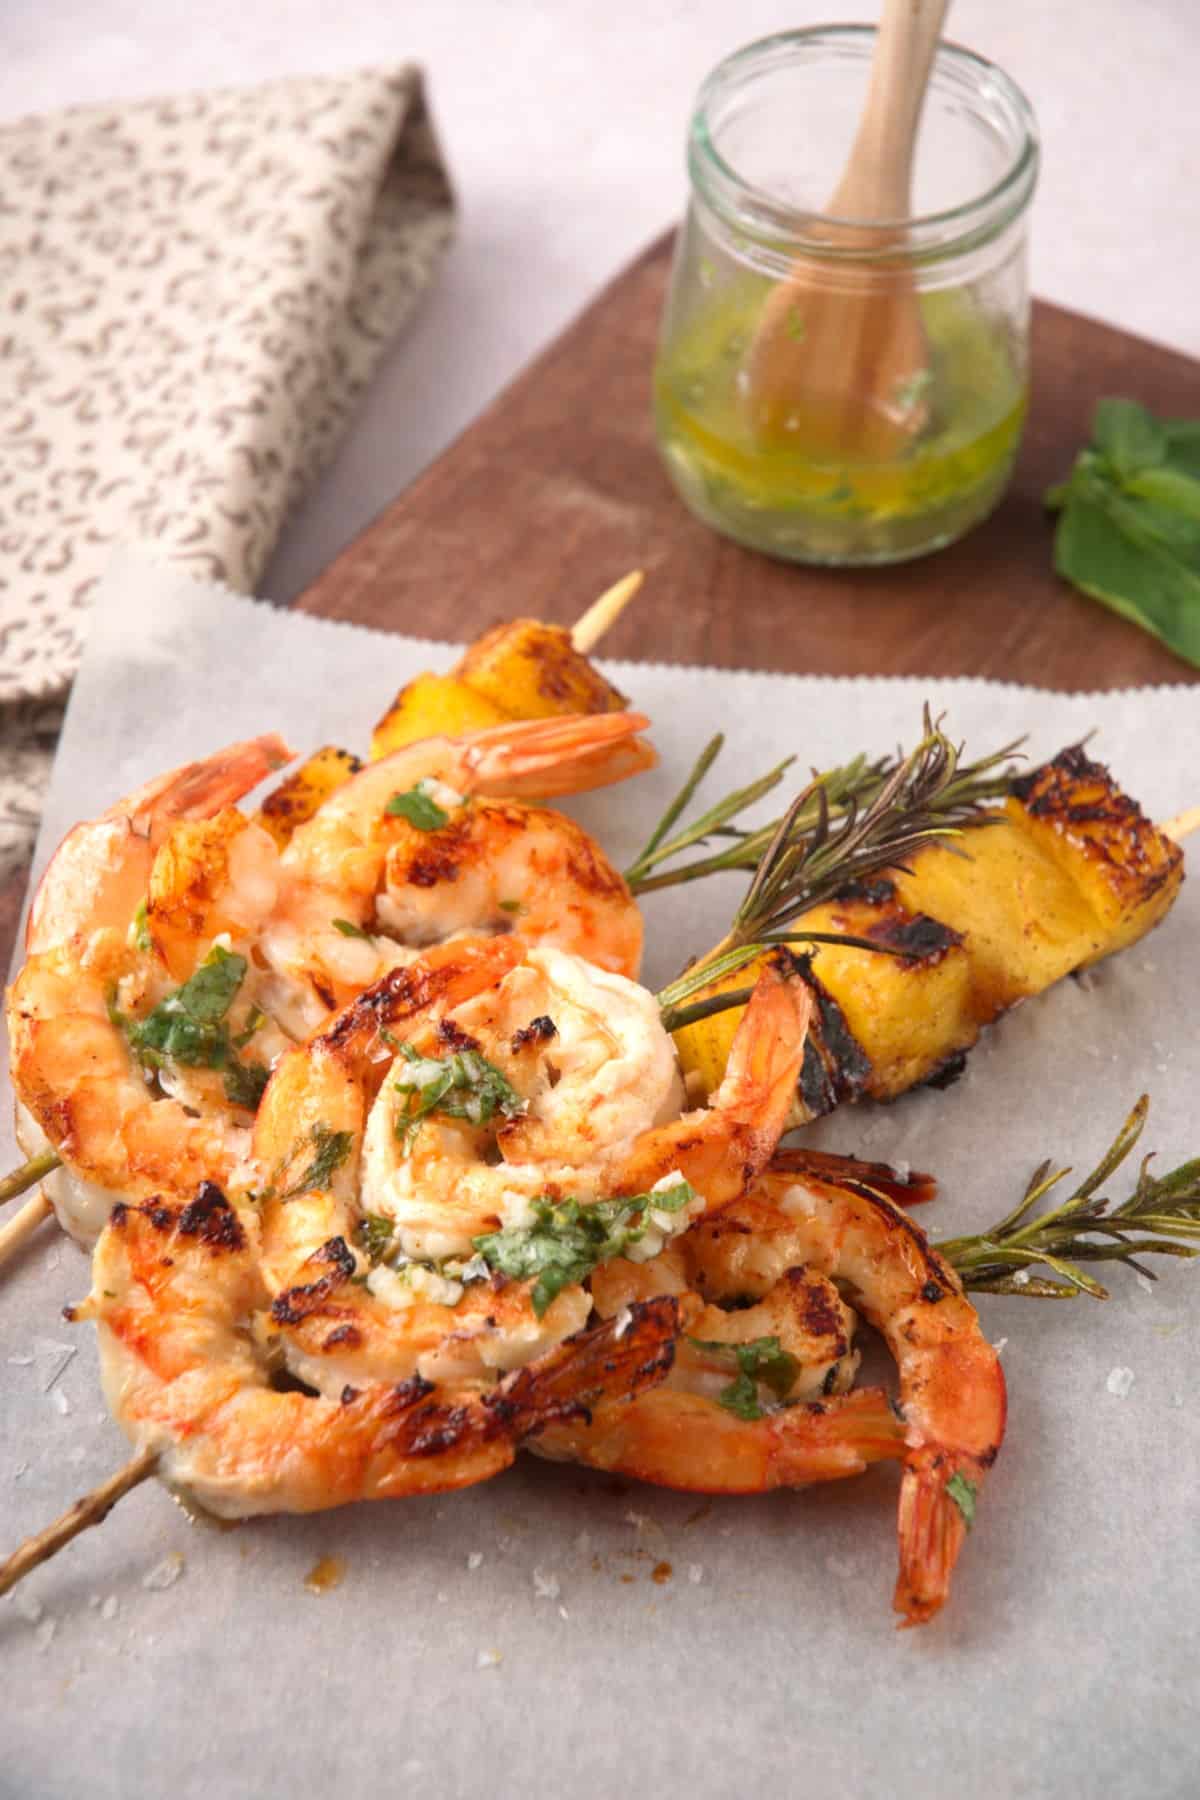 Grilled shrimp on rosemary skewers and skewered pineapple wedges on parchment paper with sauce on the side.